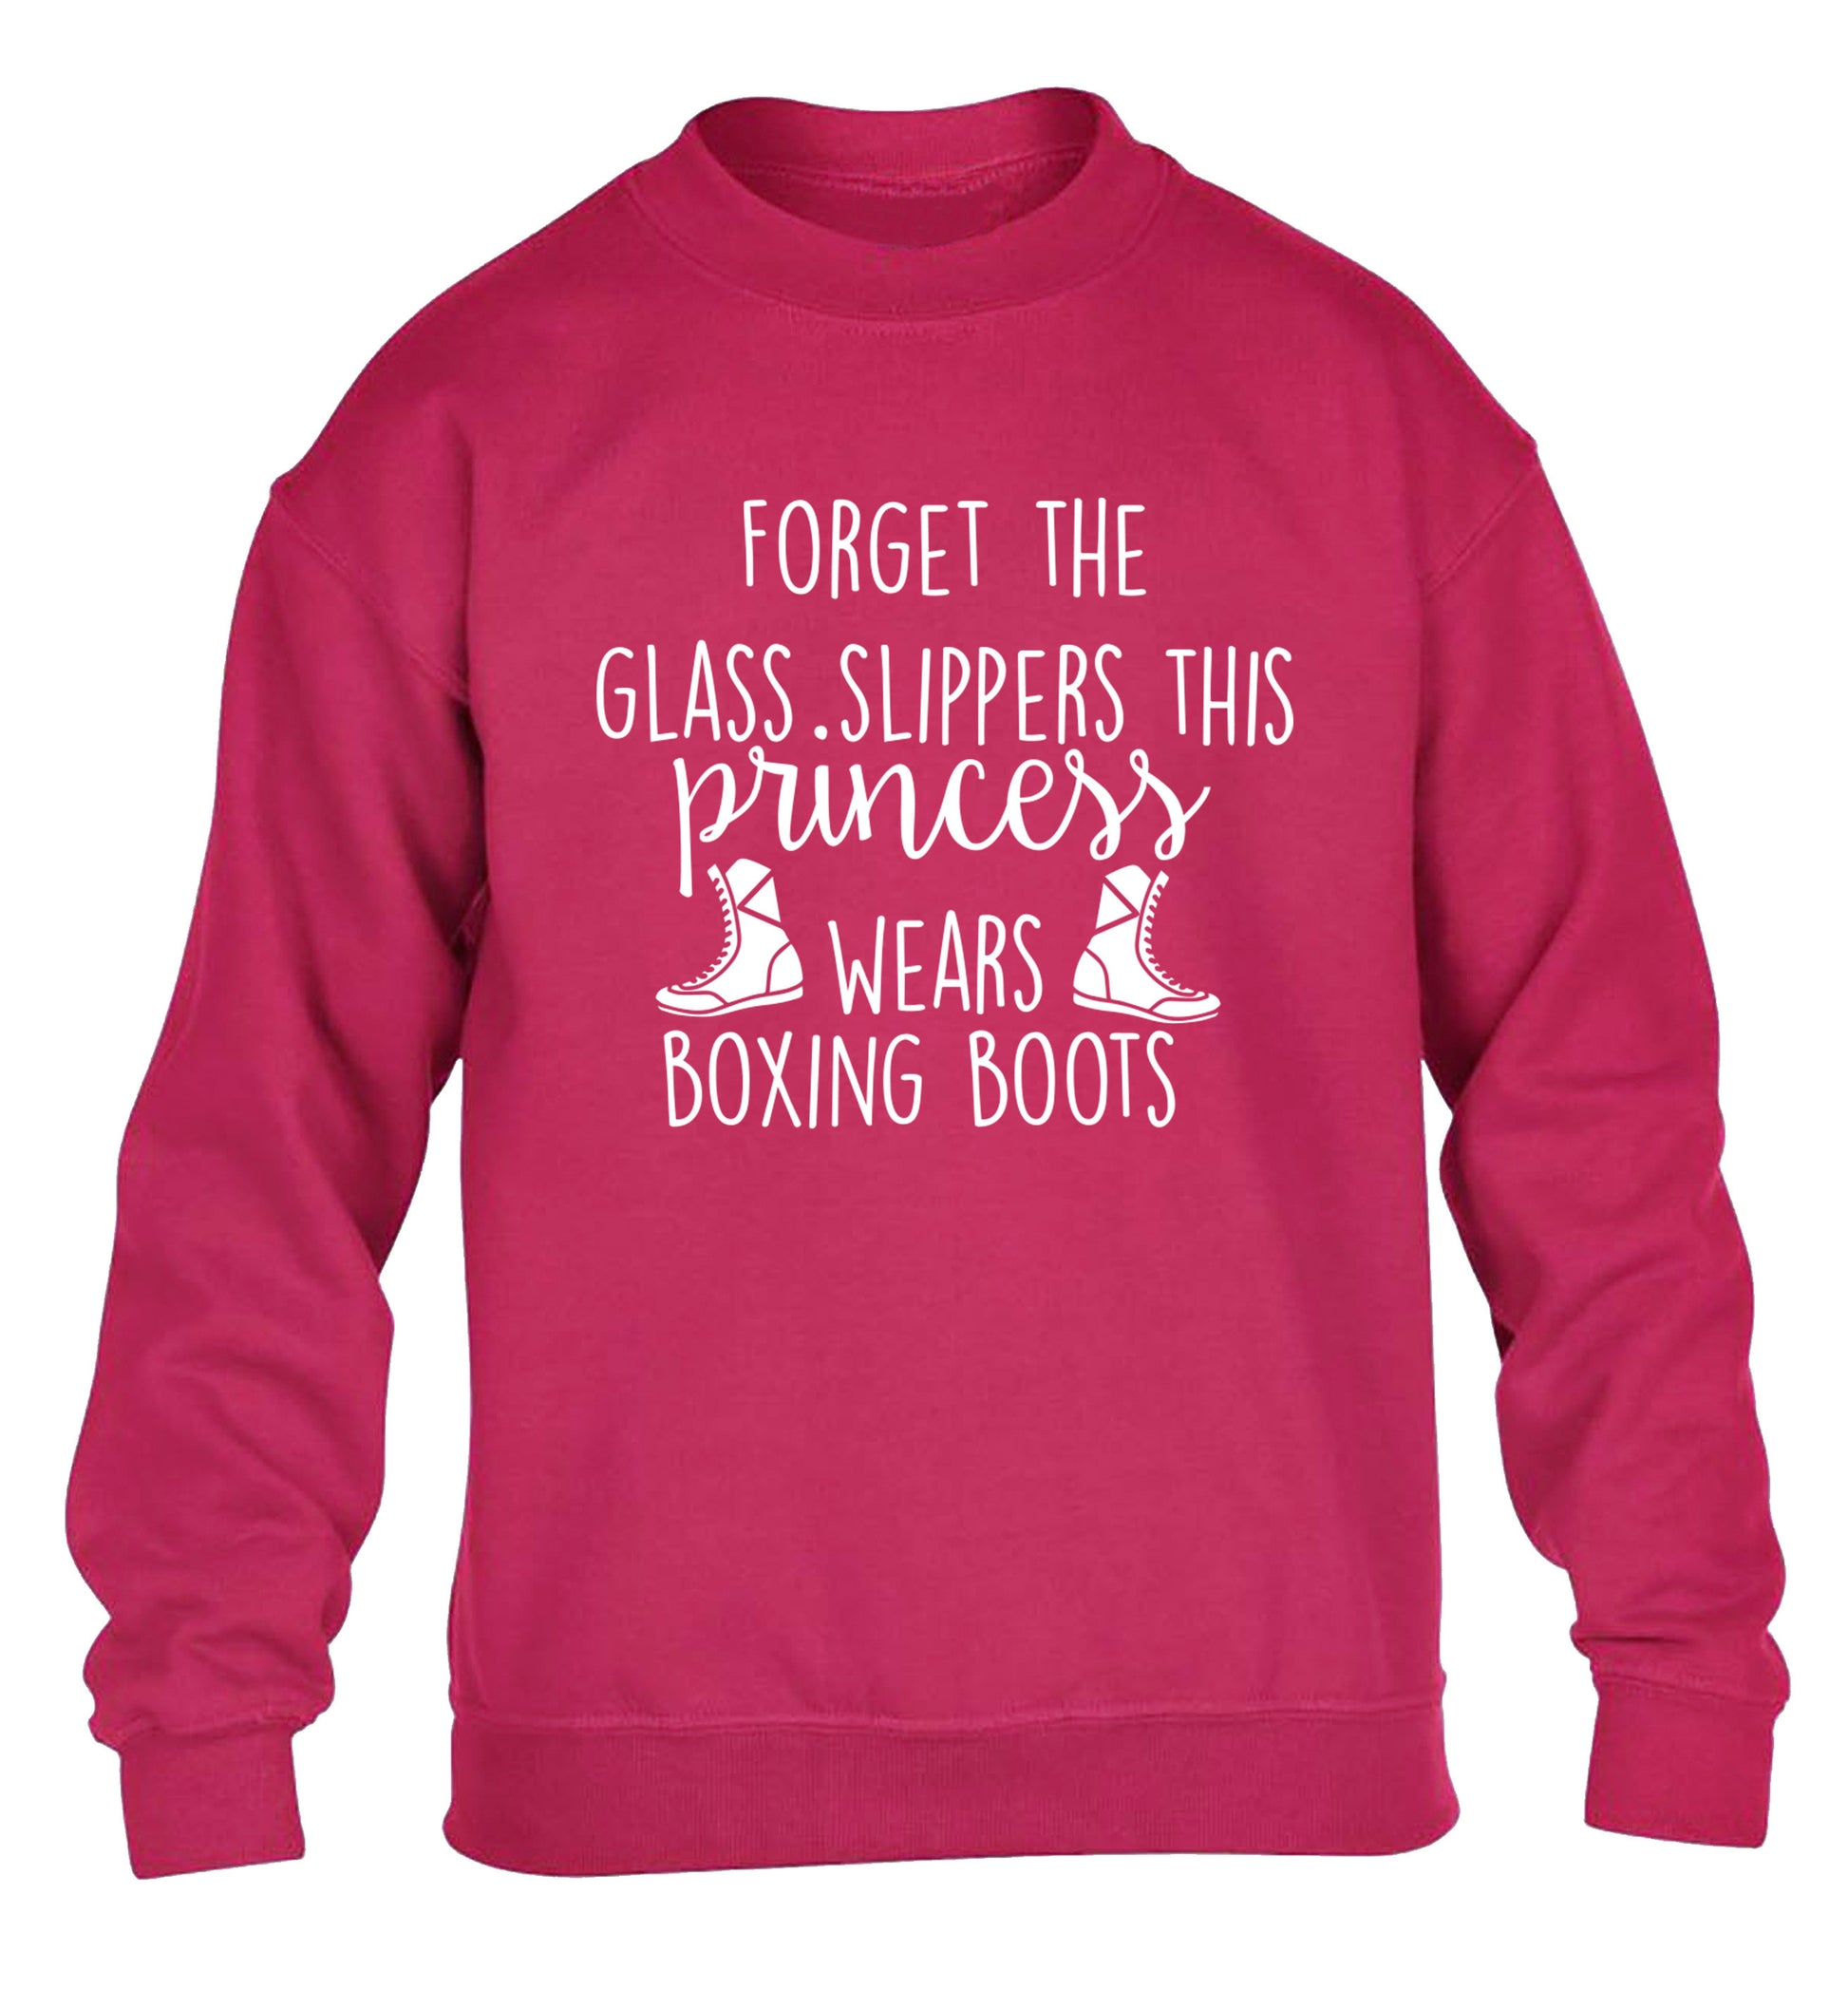 Forget the glass slippers this princess wears boxing boots children's pink sweater 12-14 Years